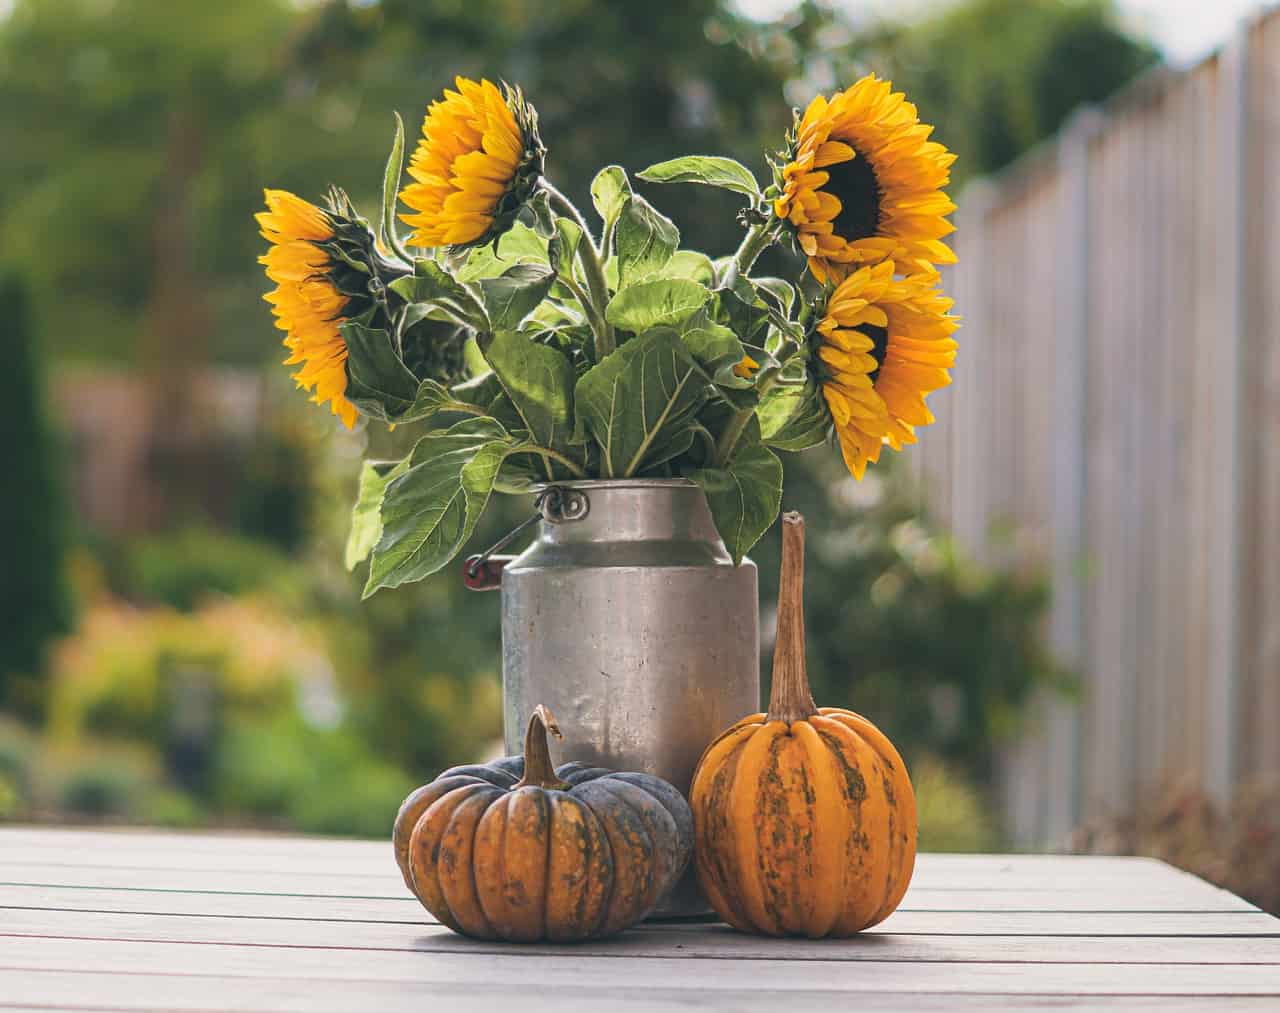 DIY pumpkin decorations for your porch and home!